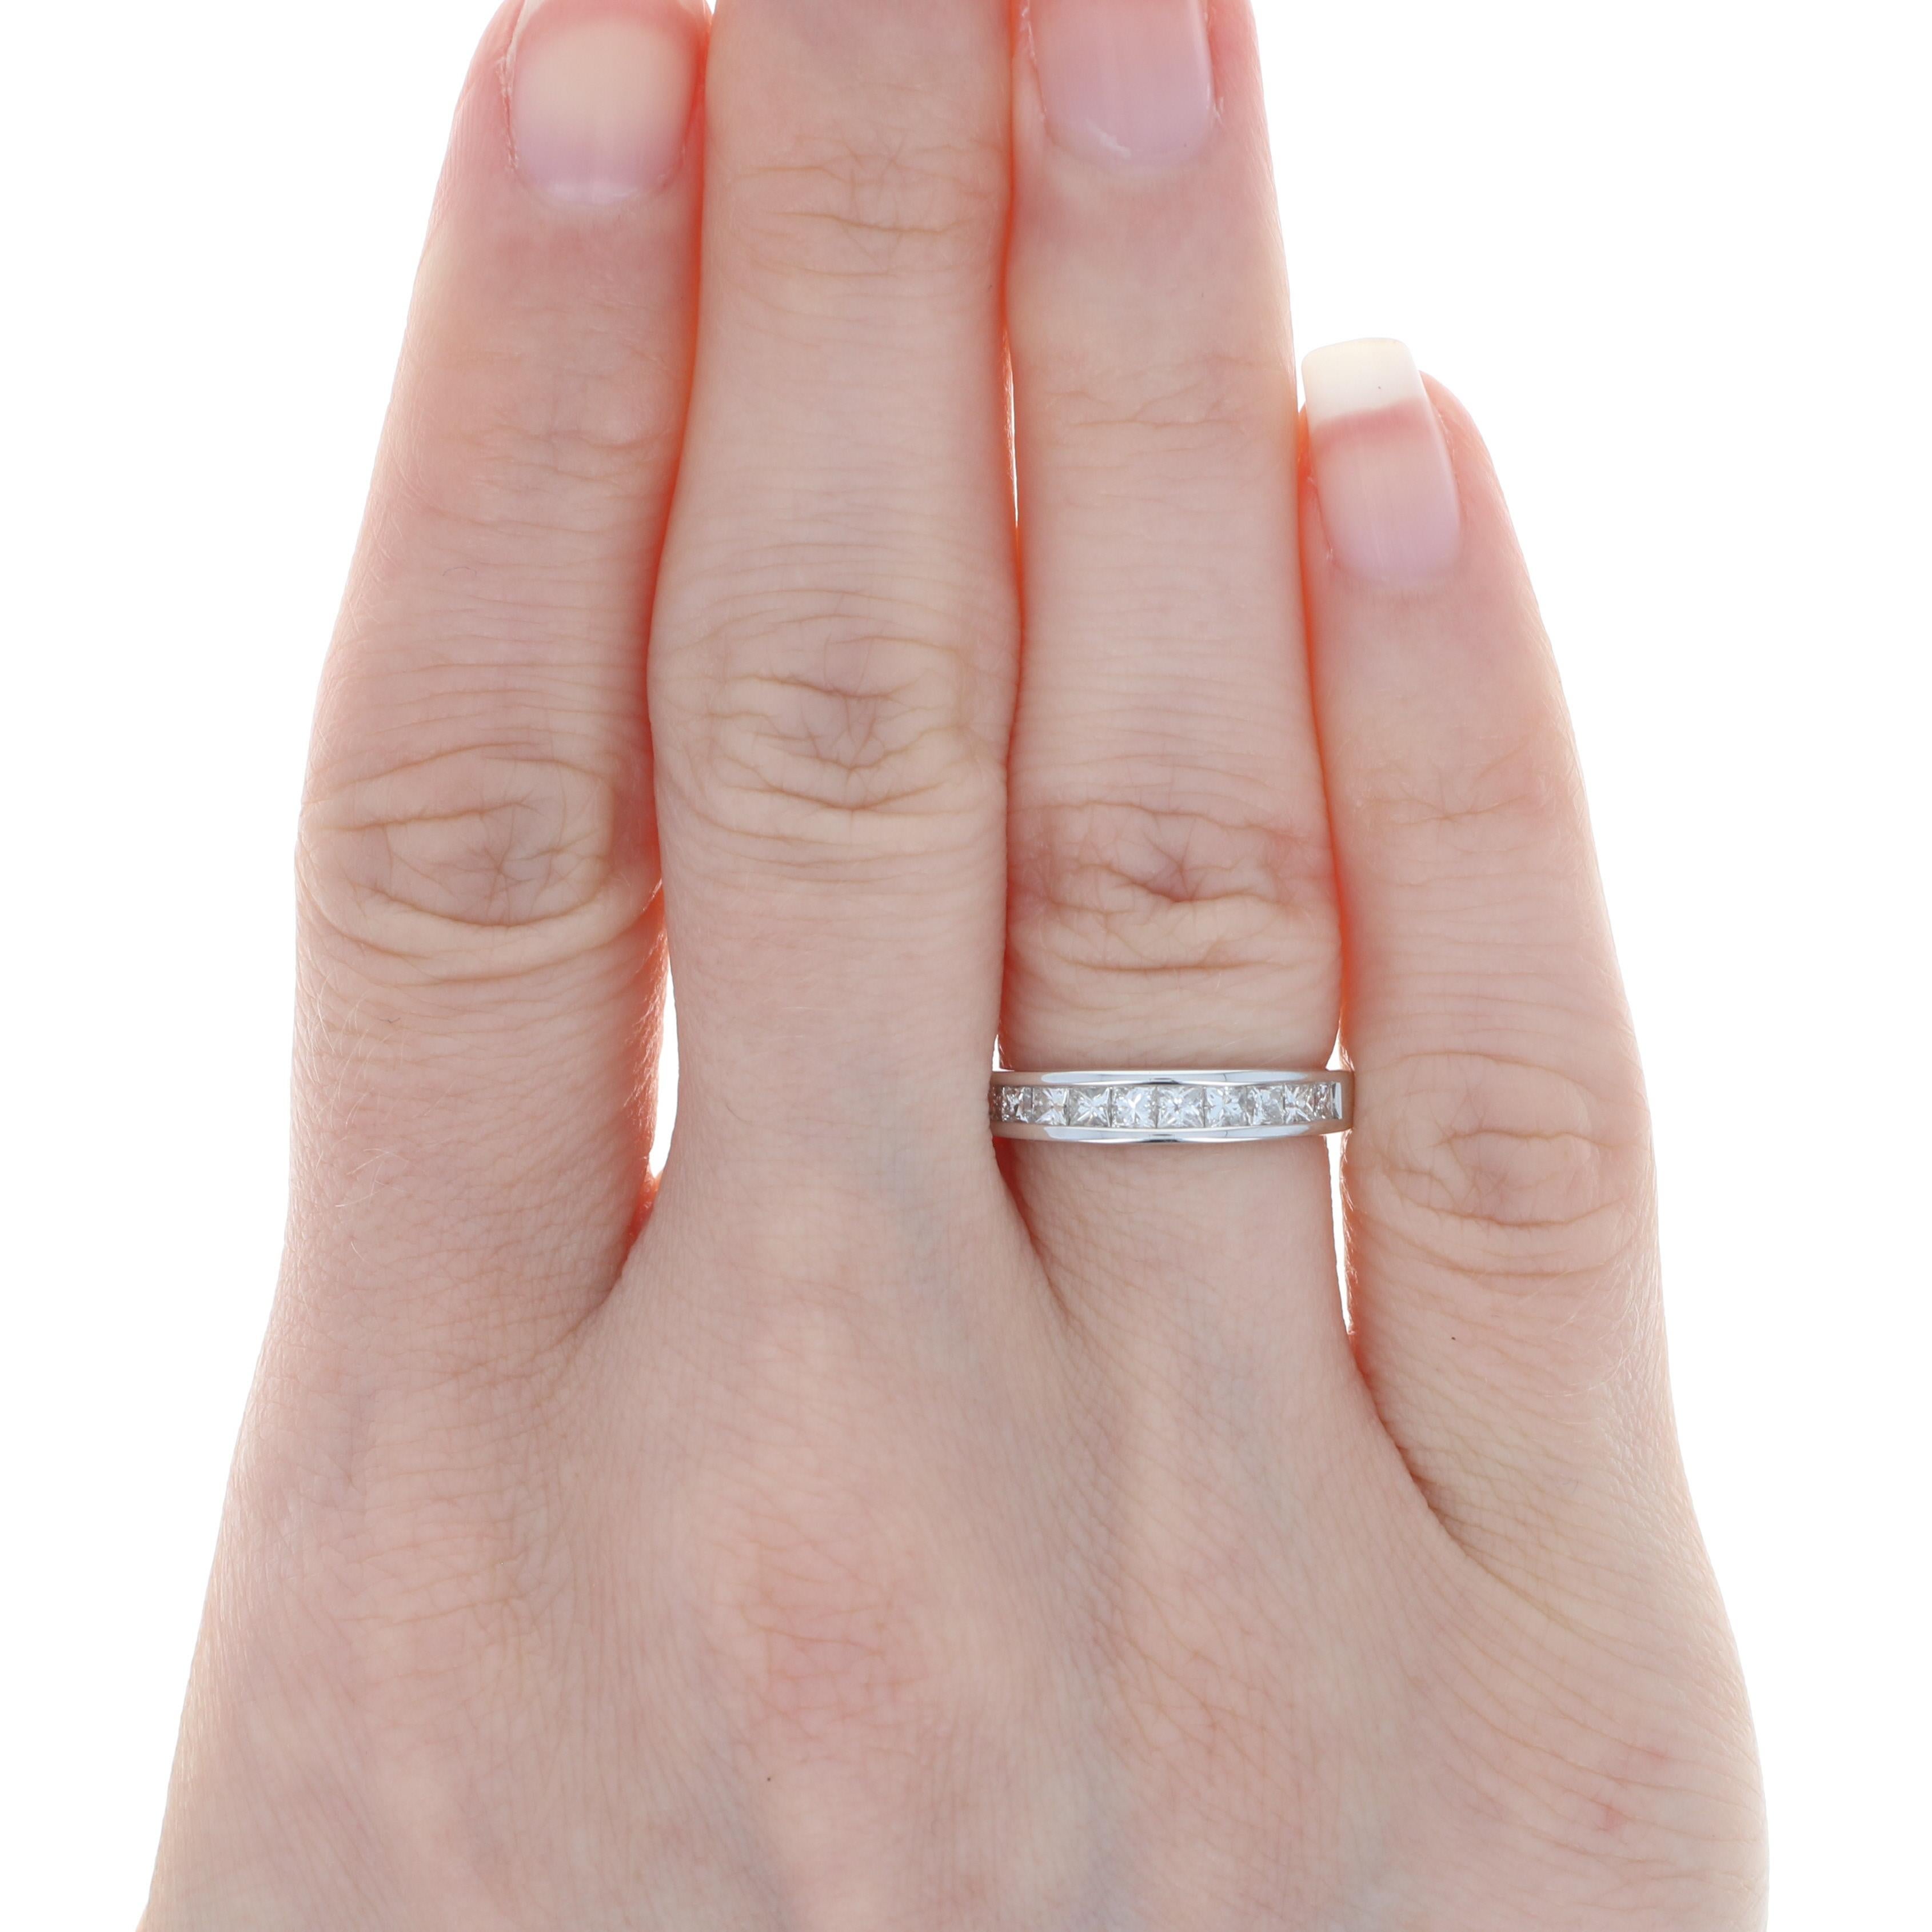 Whether it is worn solo or paired with her engagement piece, this dazzling wedding band is sure to delight your bride for a lifetime! Ten princess cut diamonds are set across the ported 14k white gold band that allows light to stream through the